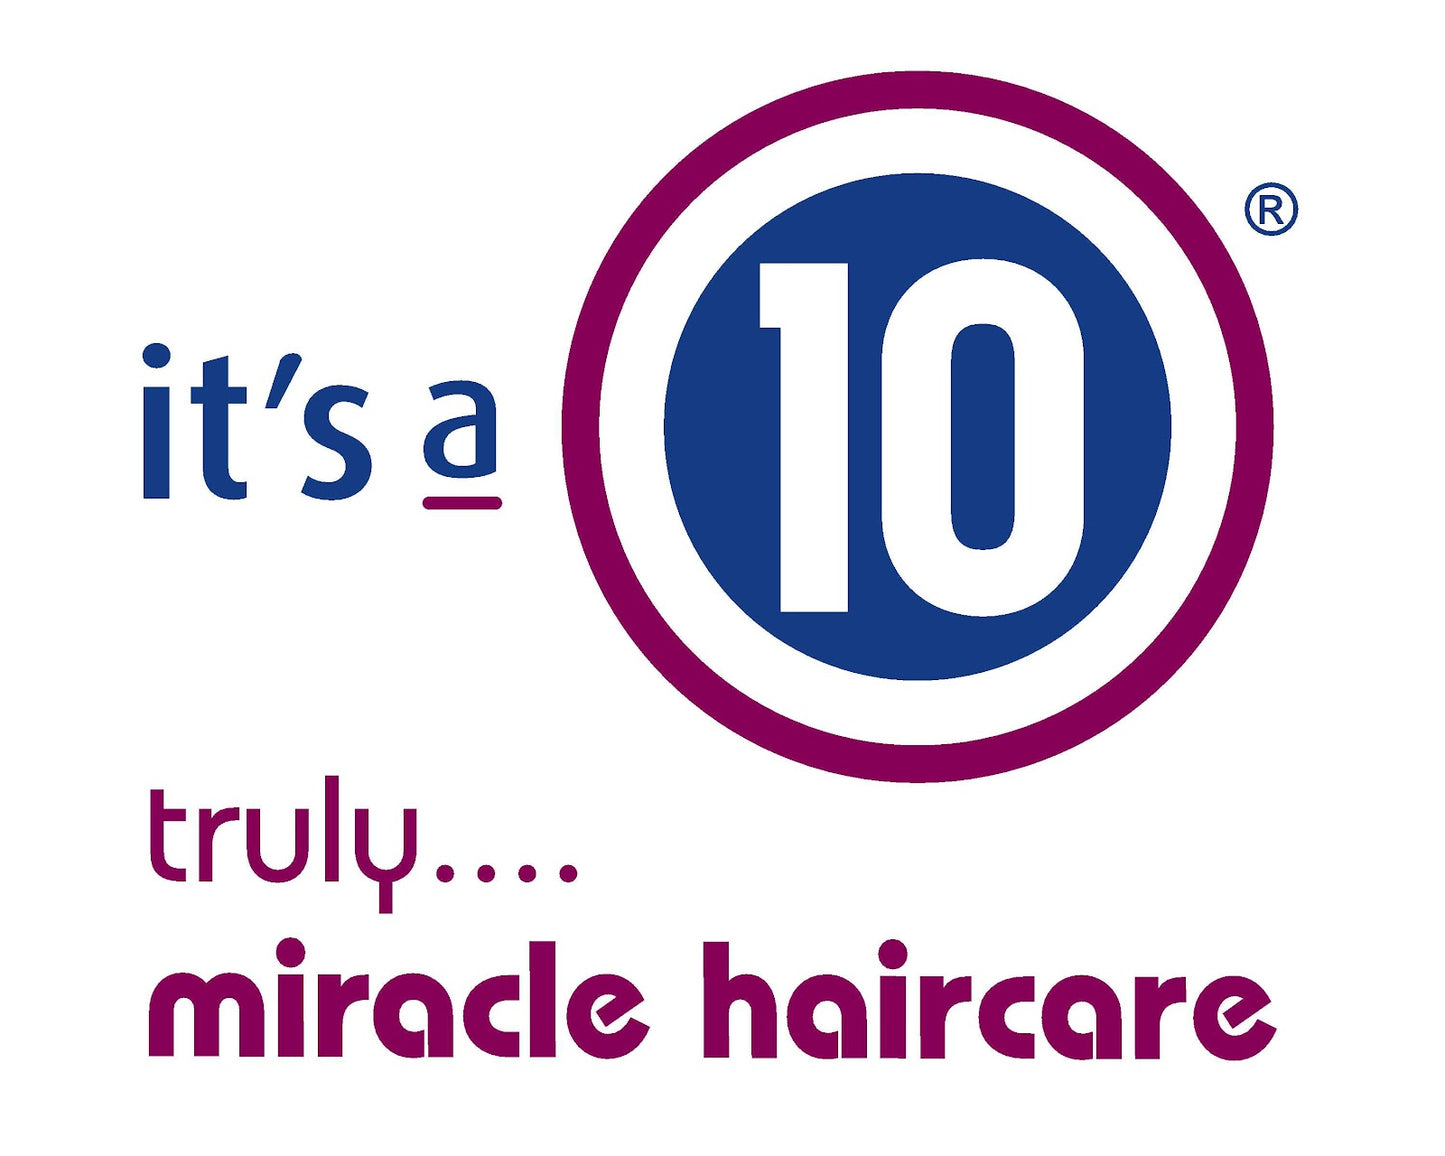 It's A 10 Five Minute Hair Repair For Blondes 5 Oz